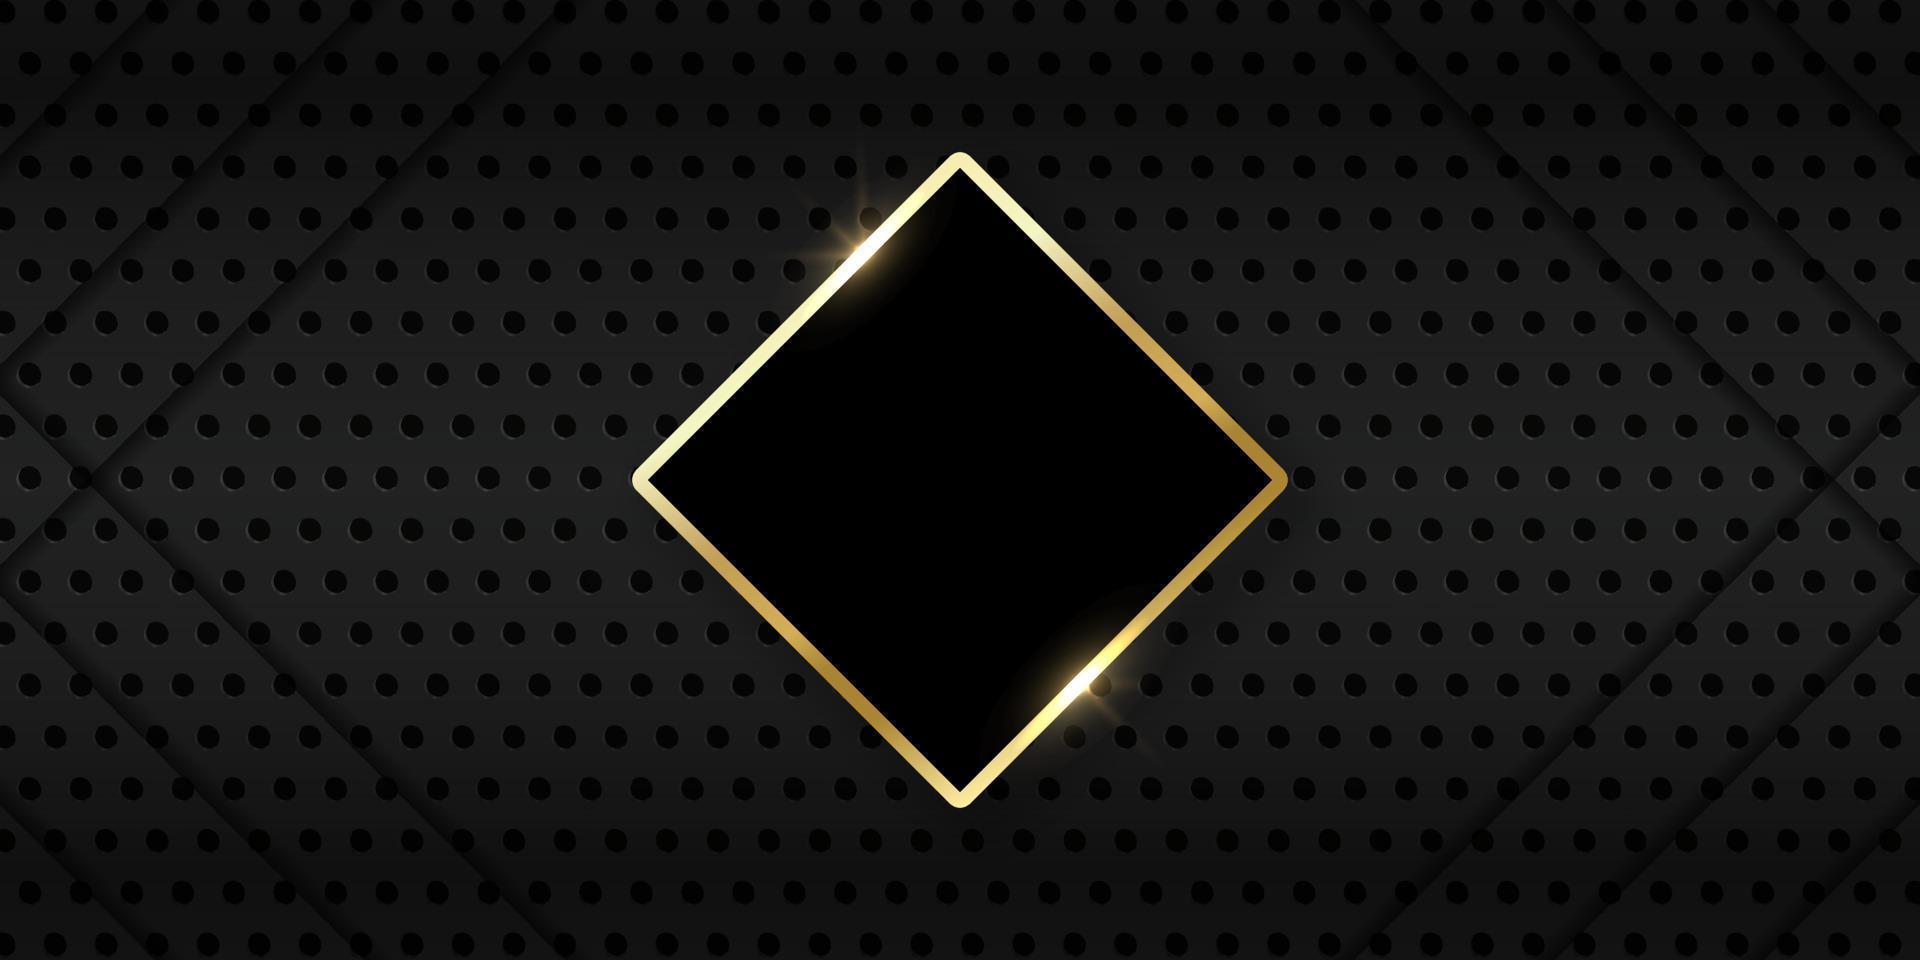 Golden Shiny Rhombus on Black Metal Meshed Background. Metal Dark Background Perforated by Dots with Gold Square Frame. Grid Pattern and 3D Lines. Abstract Modern Design. Vector Illustration.